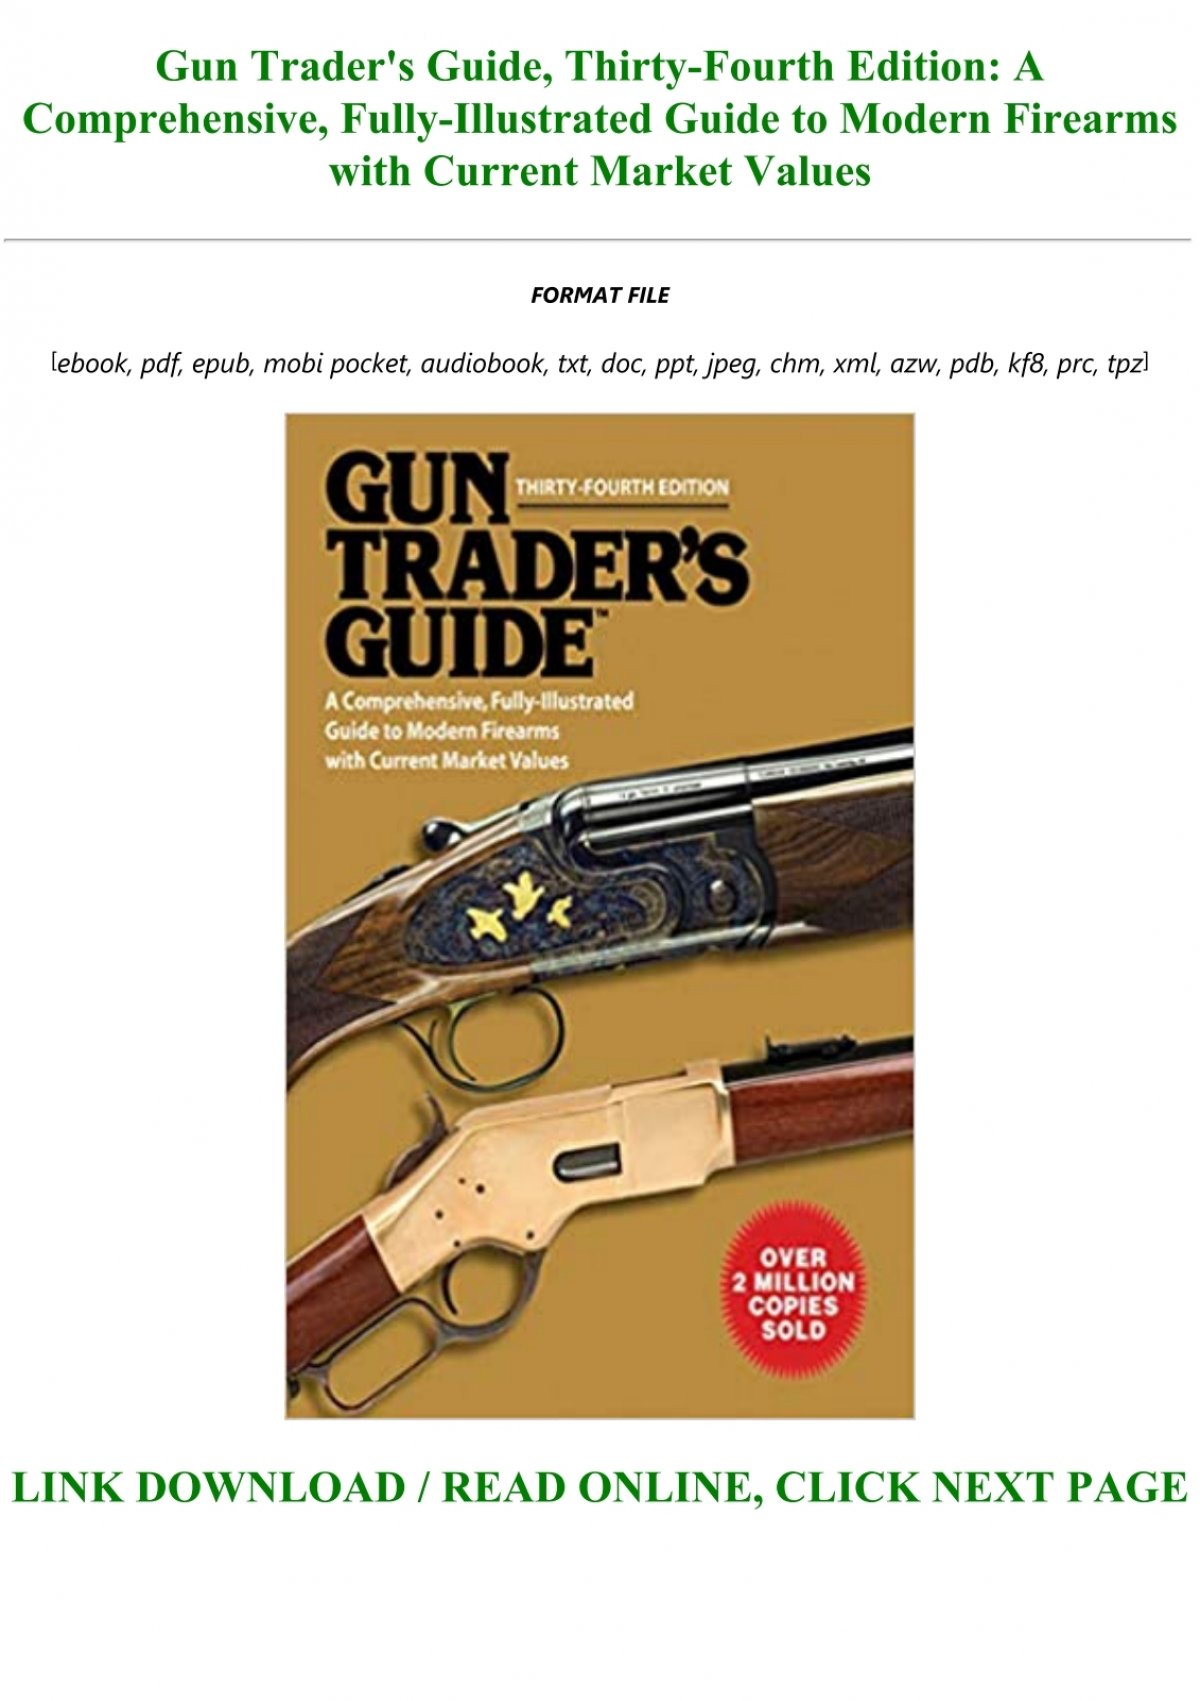 Download Pdf Gun Trader S Guide Thirty Fourth Edition A Comprehensive Fully Illustrated Guide To Modern Firearms With Current Market Values Full